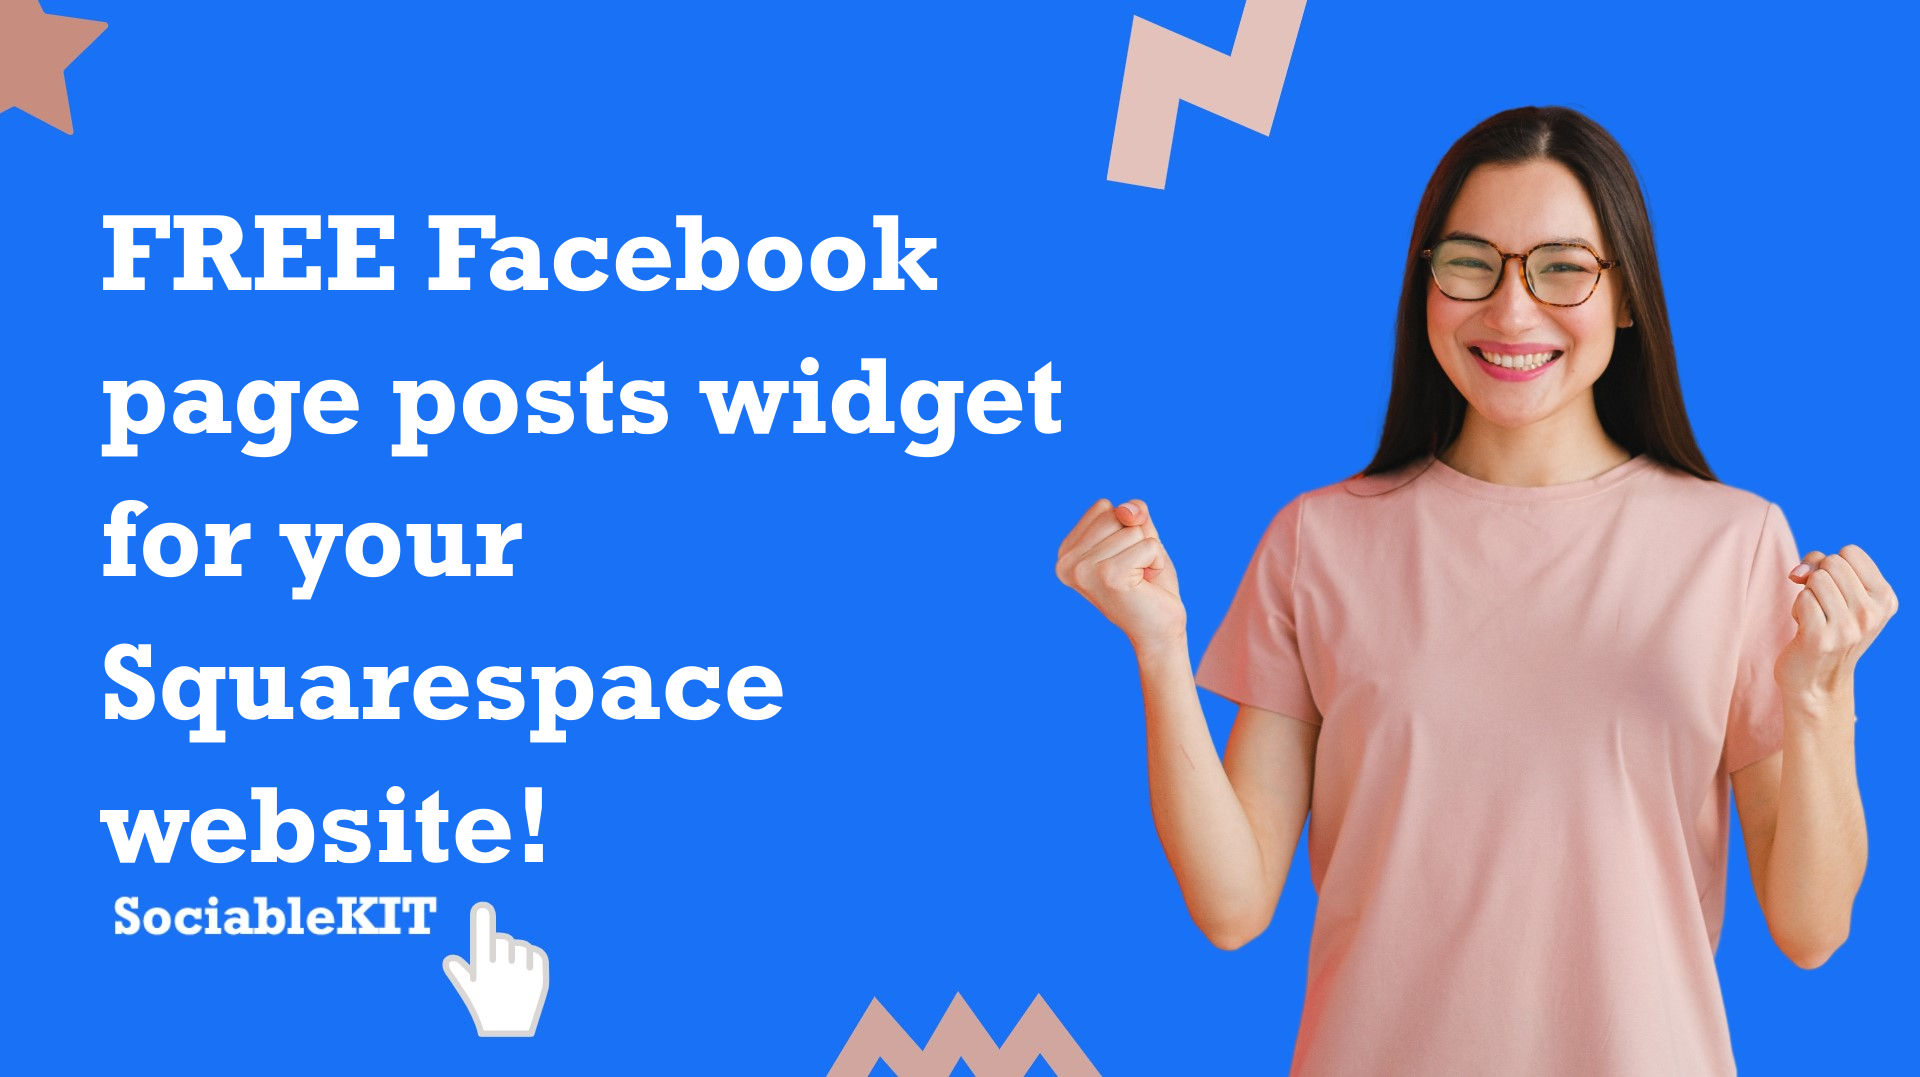 Free Facebook page posts widget for your Squarespace website